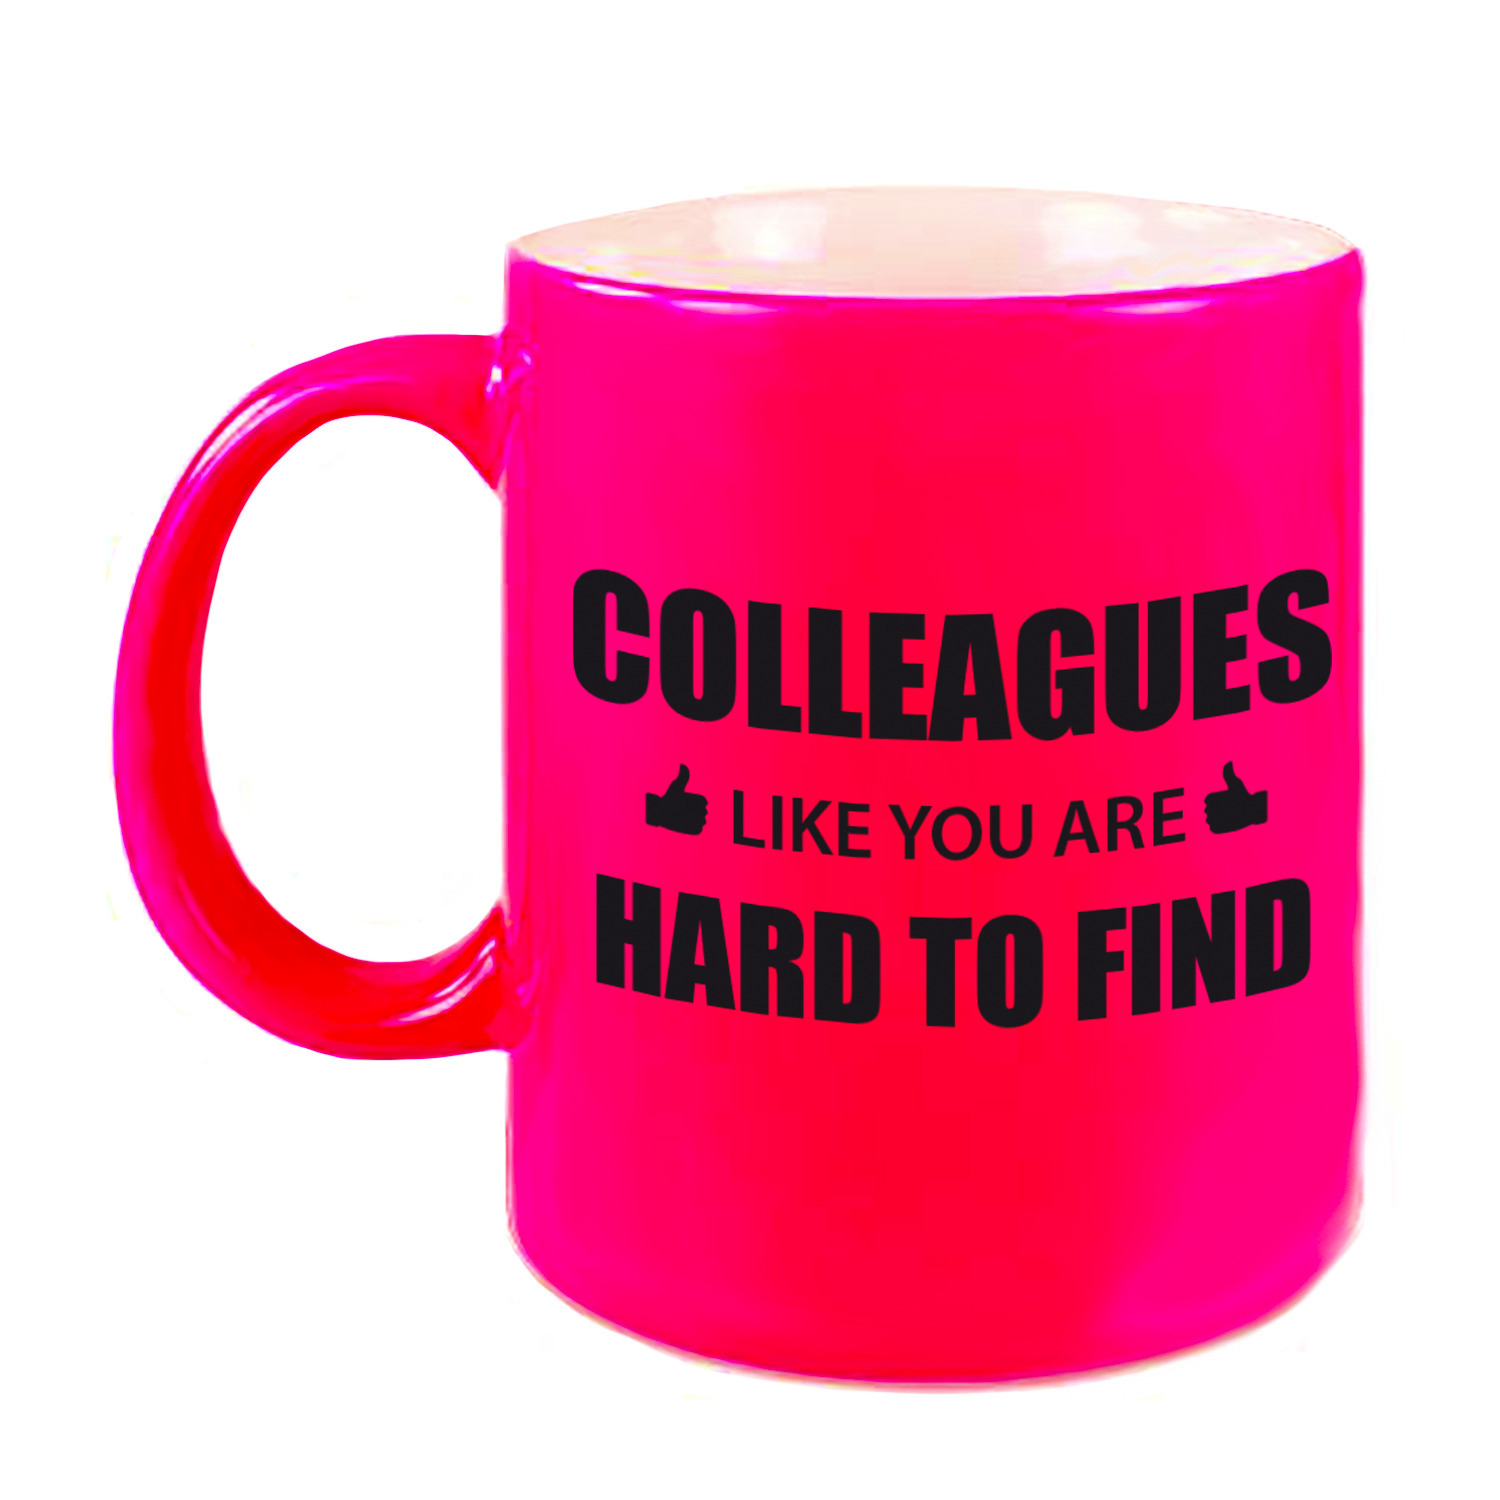 Cadeau mok-beker neon roze colleagues like you are hard to find voor personeel-collega